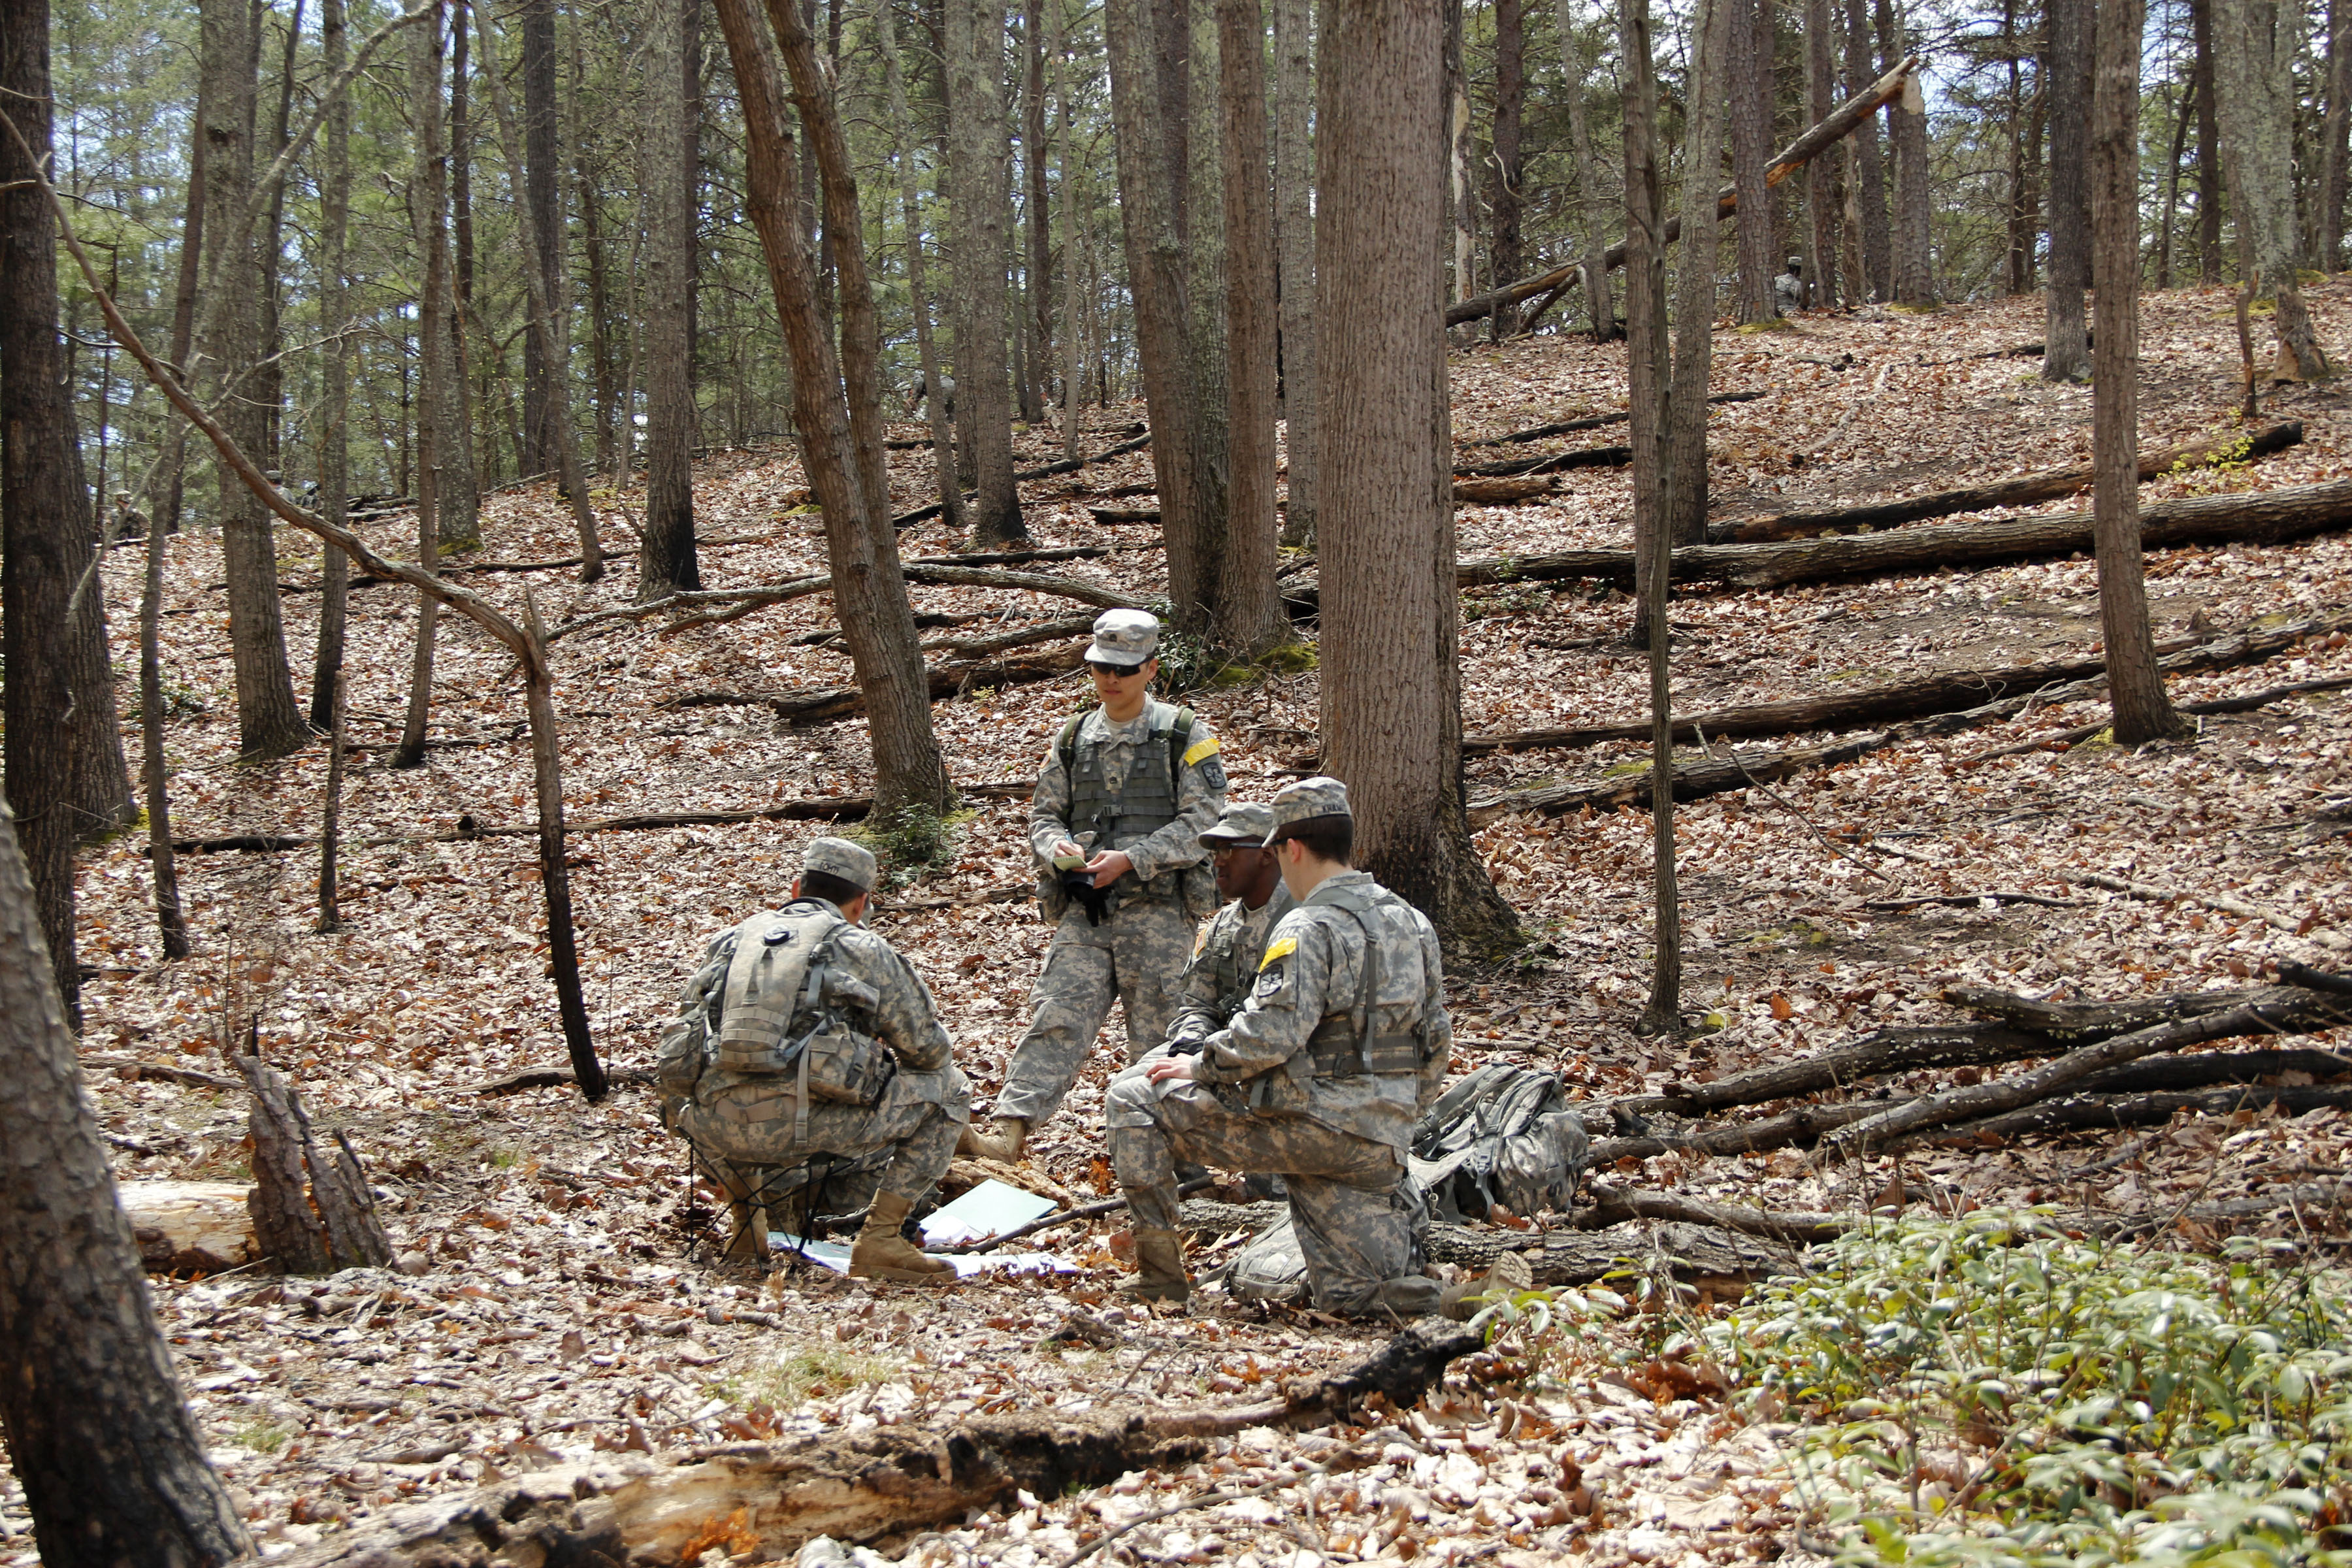 Patience and paintball: Mason cadets undergo leadership training at Fort AP Hill